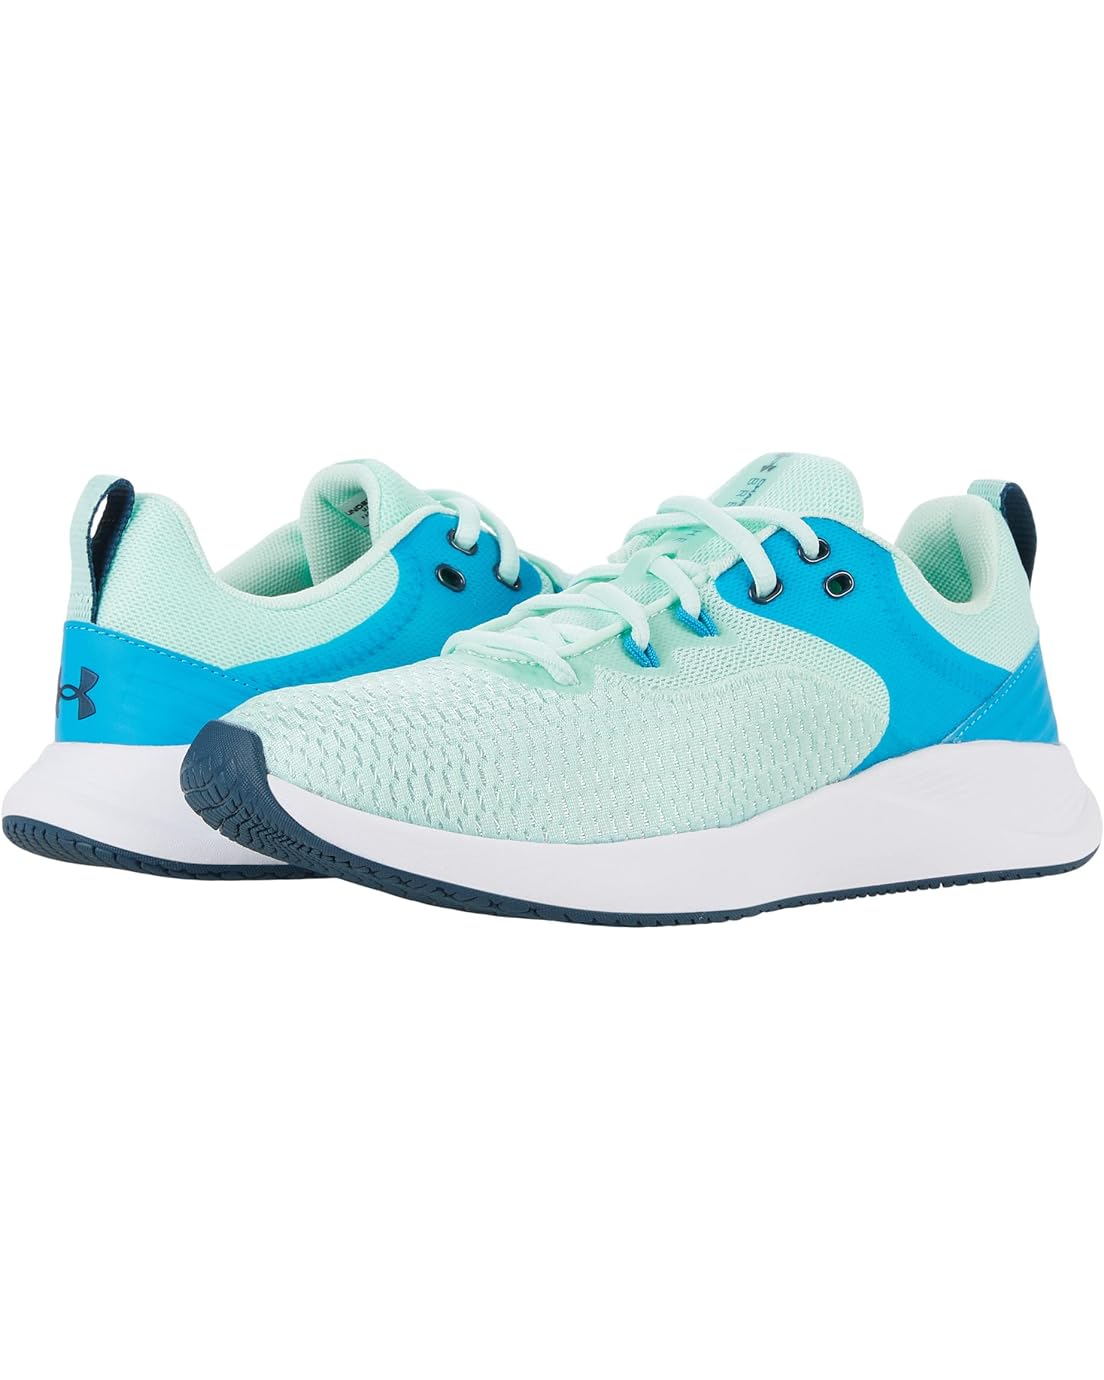 Under Armour Charged Breathe TR 3